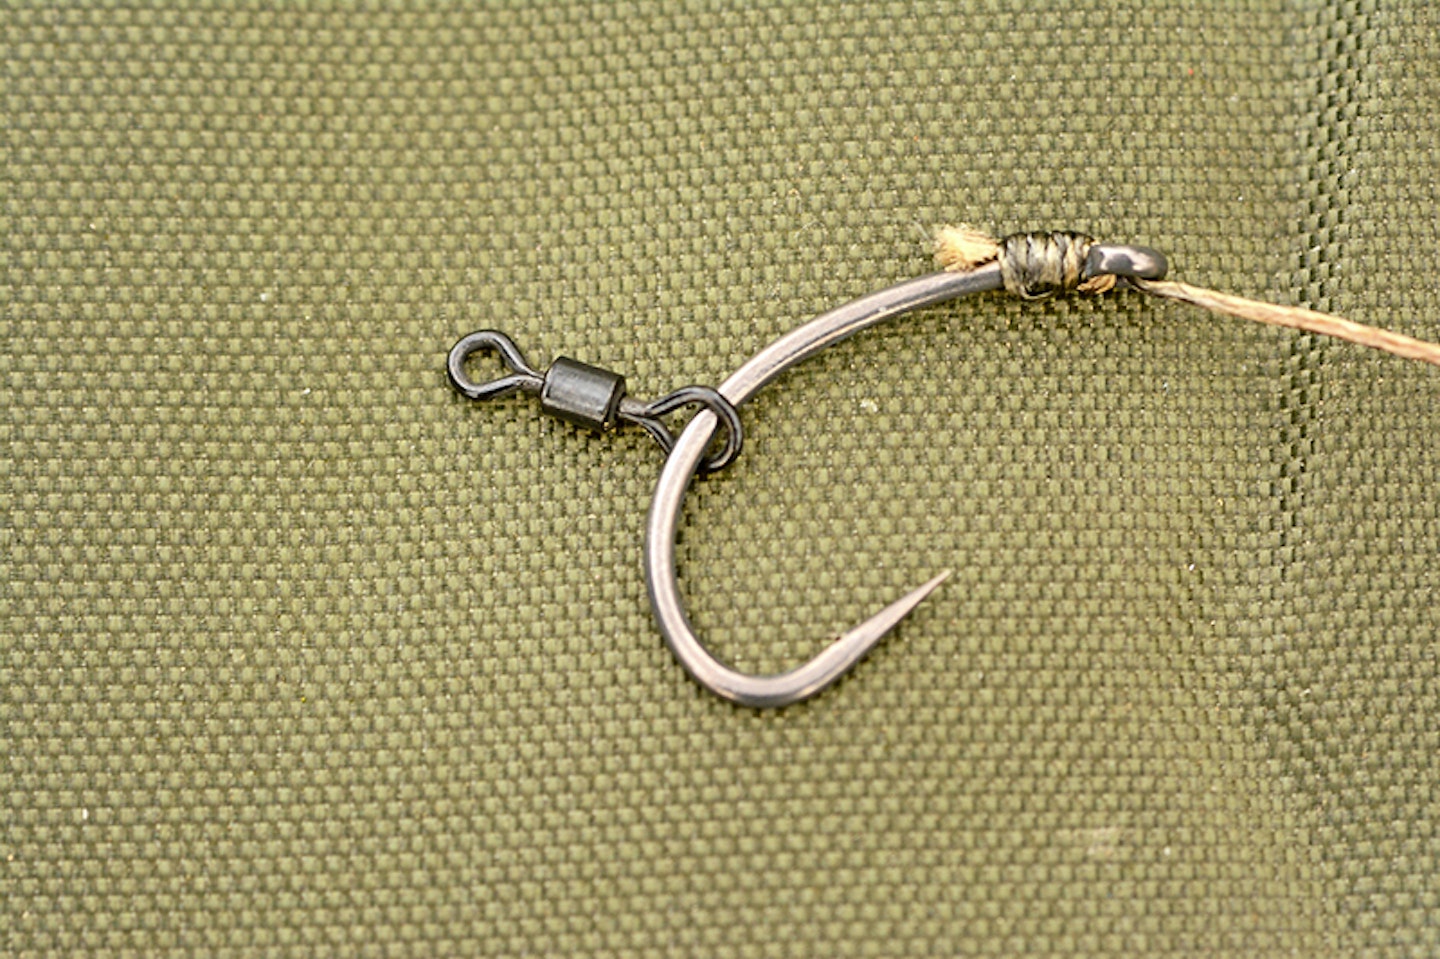 Trim the tag end of the knotless knot and then slide a small rig swivel on to the hook 